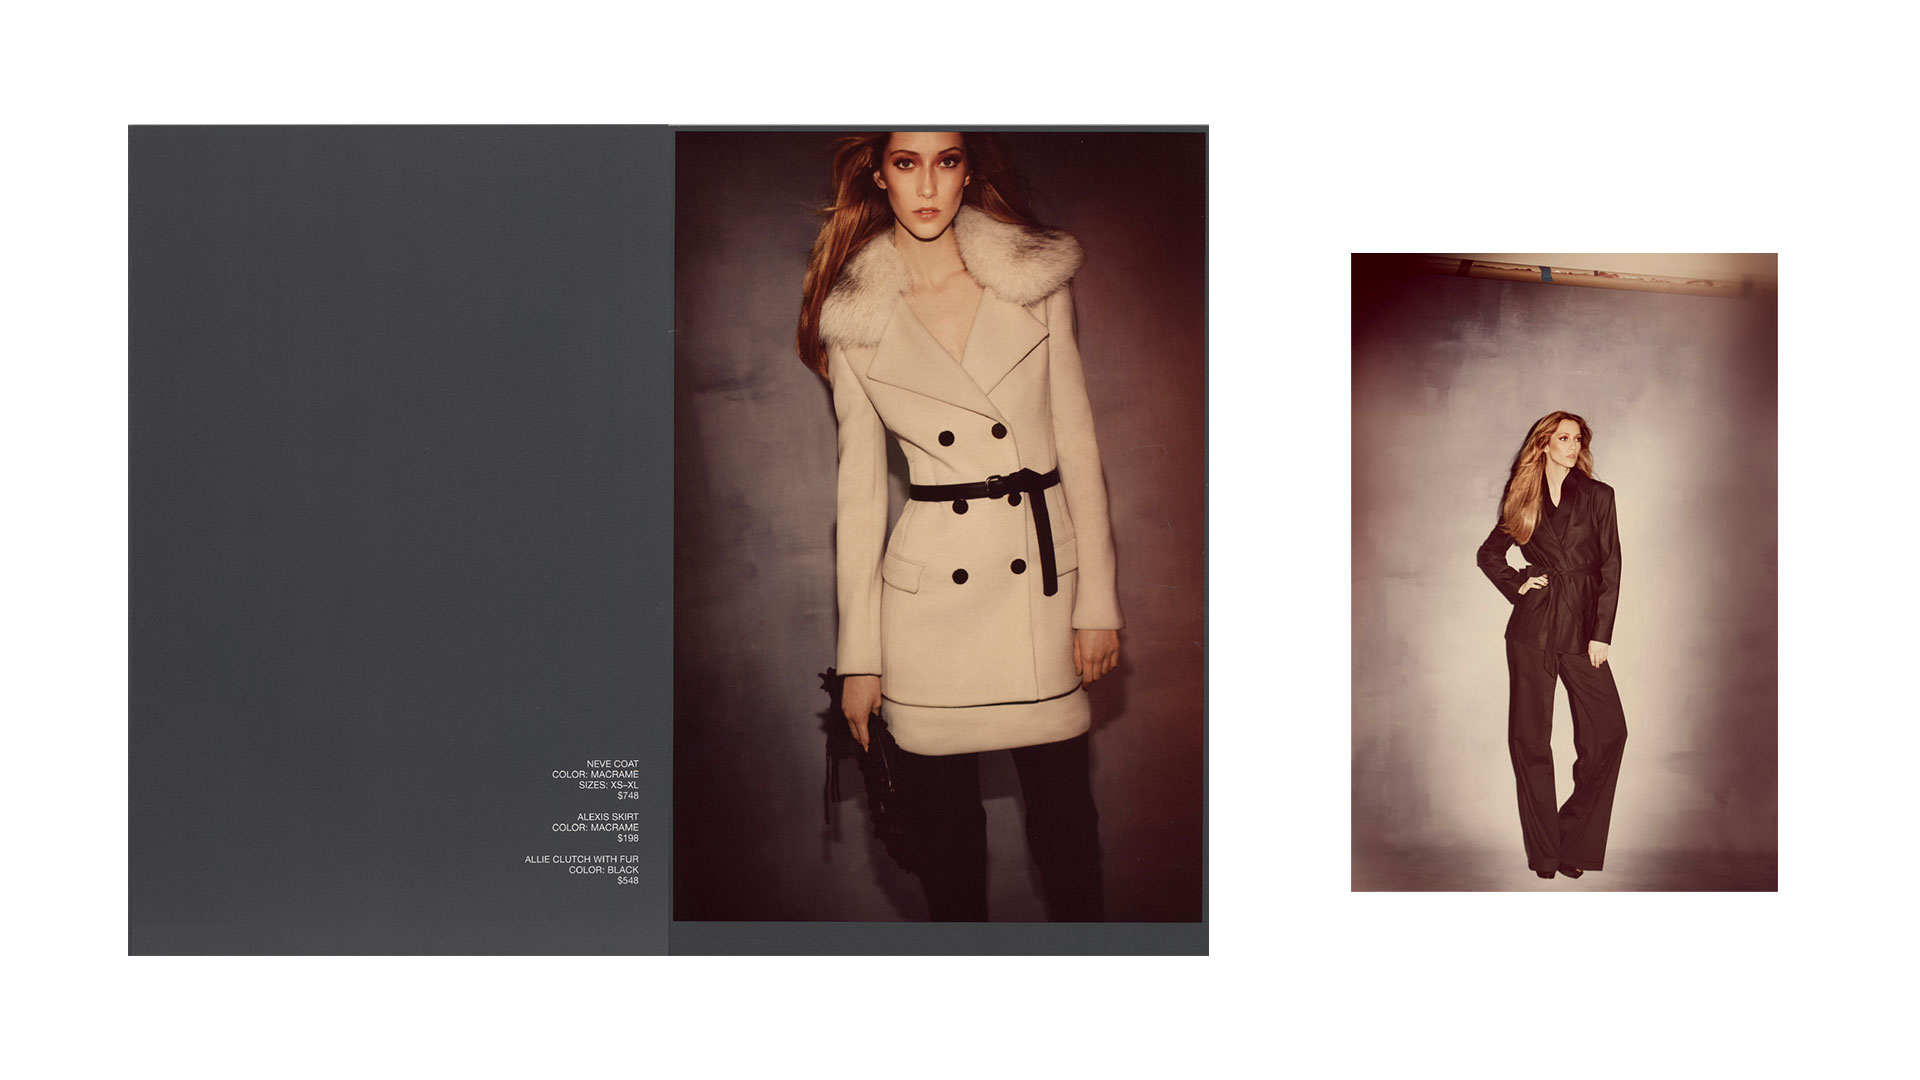 ELIE-TAHARI_PLANETFAB_OUTERWEAR-COLLECTION_MAILER_ALANA-ZIMMER_GUY-AROCH_PG5-6